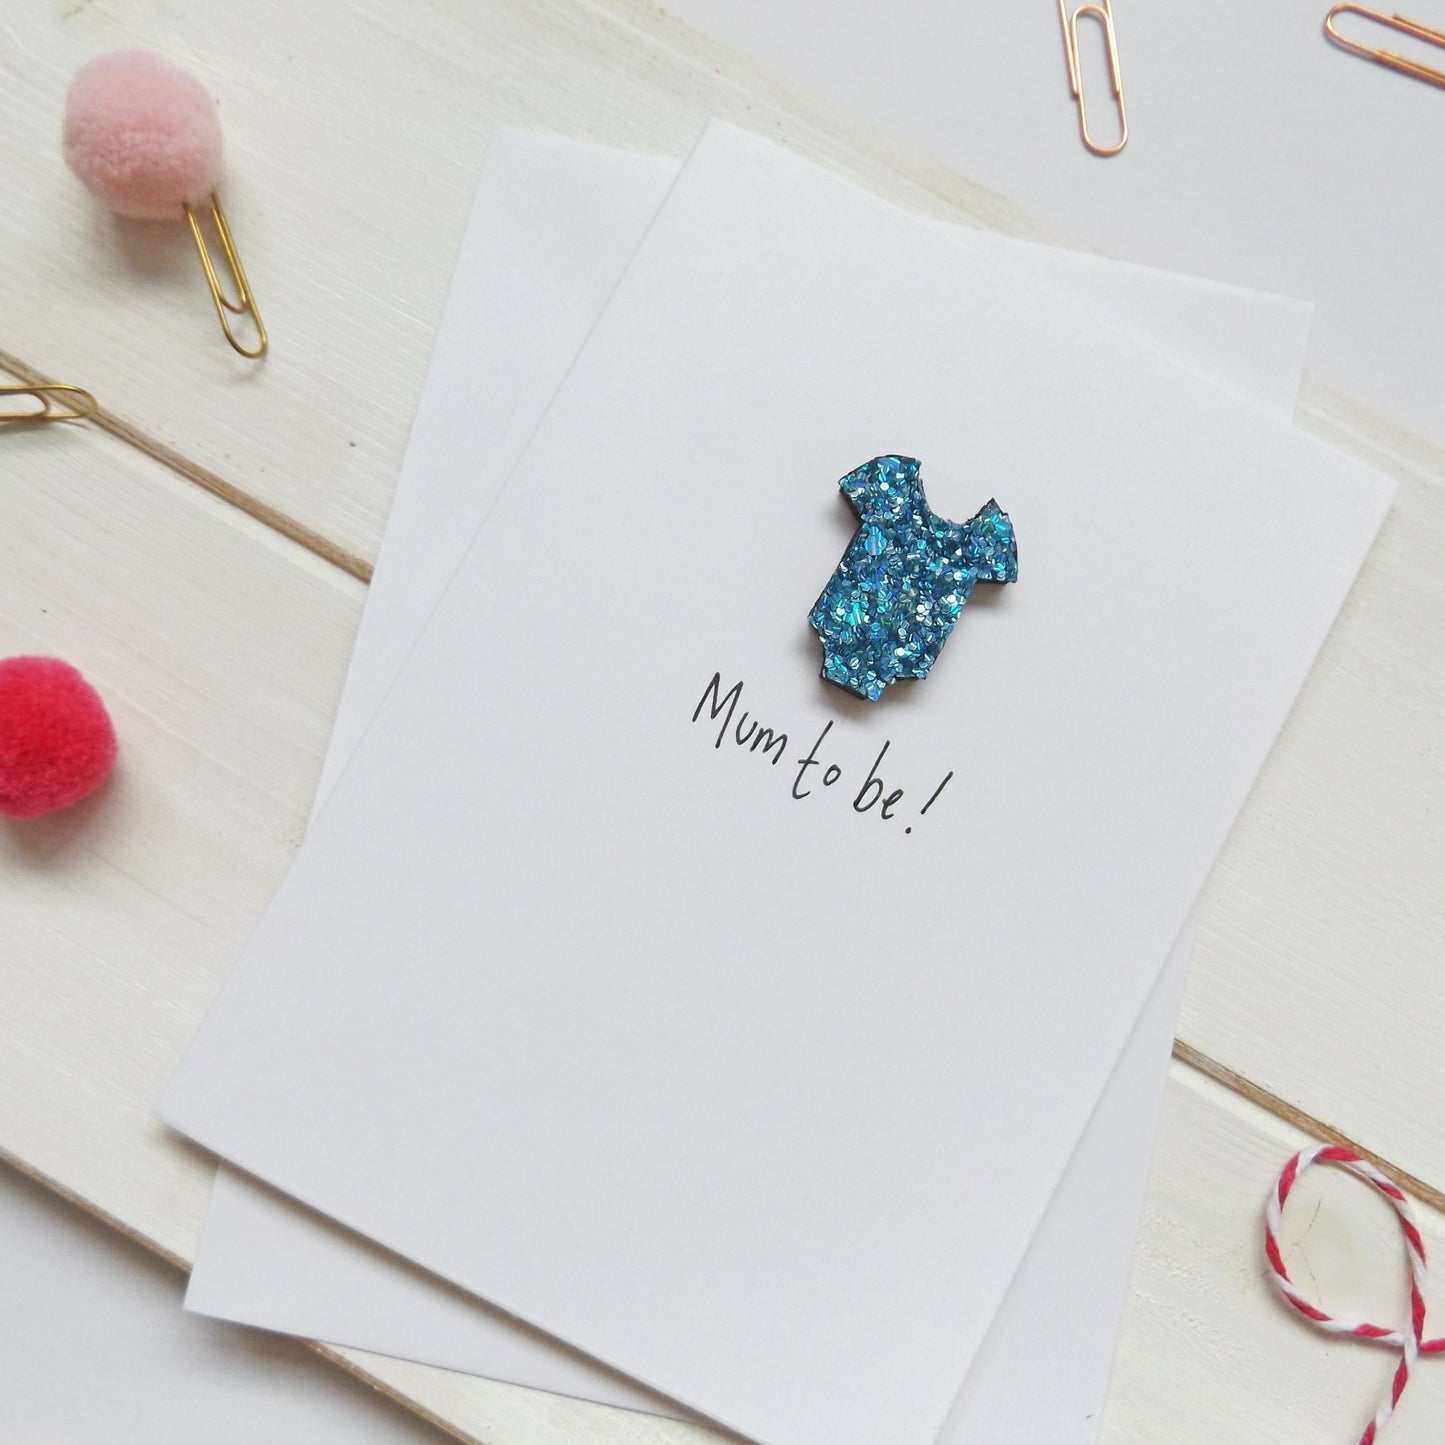 Mum to be! Silver/Grey Glitter baby grow baby shower card